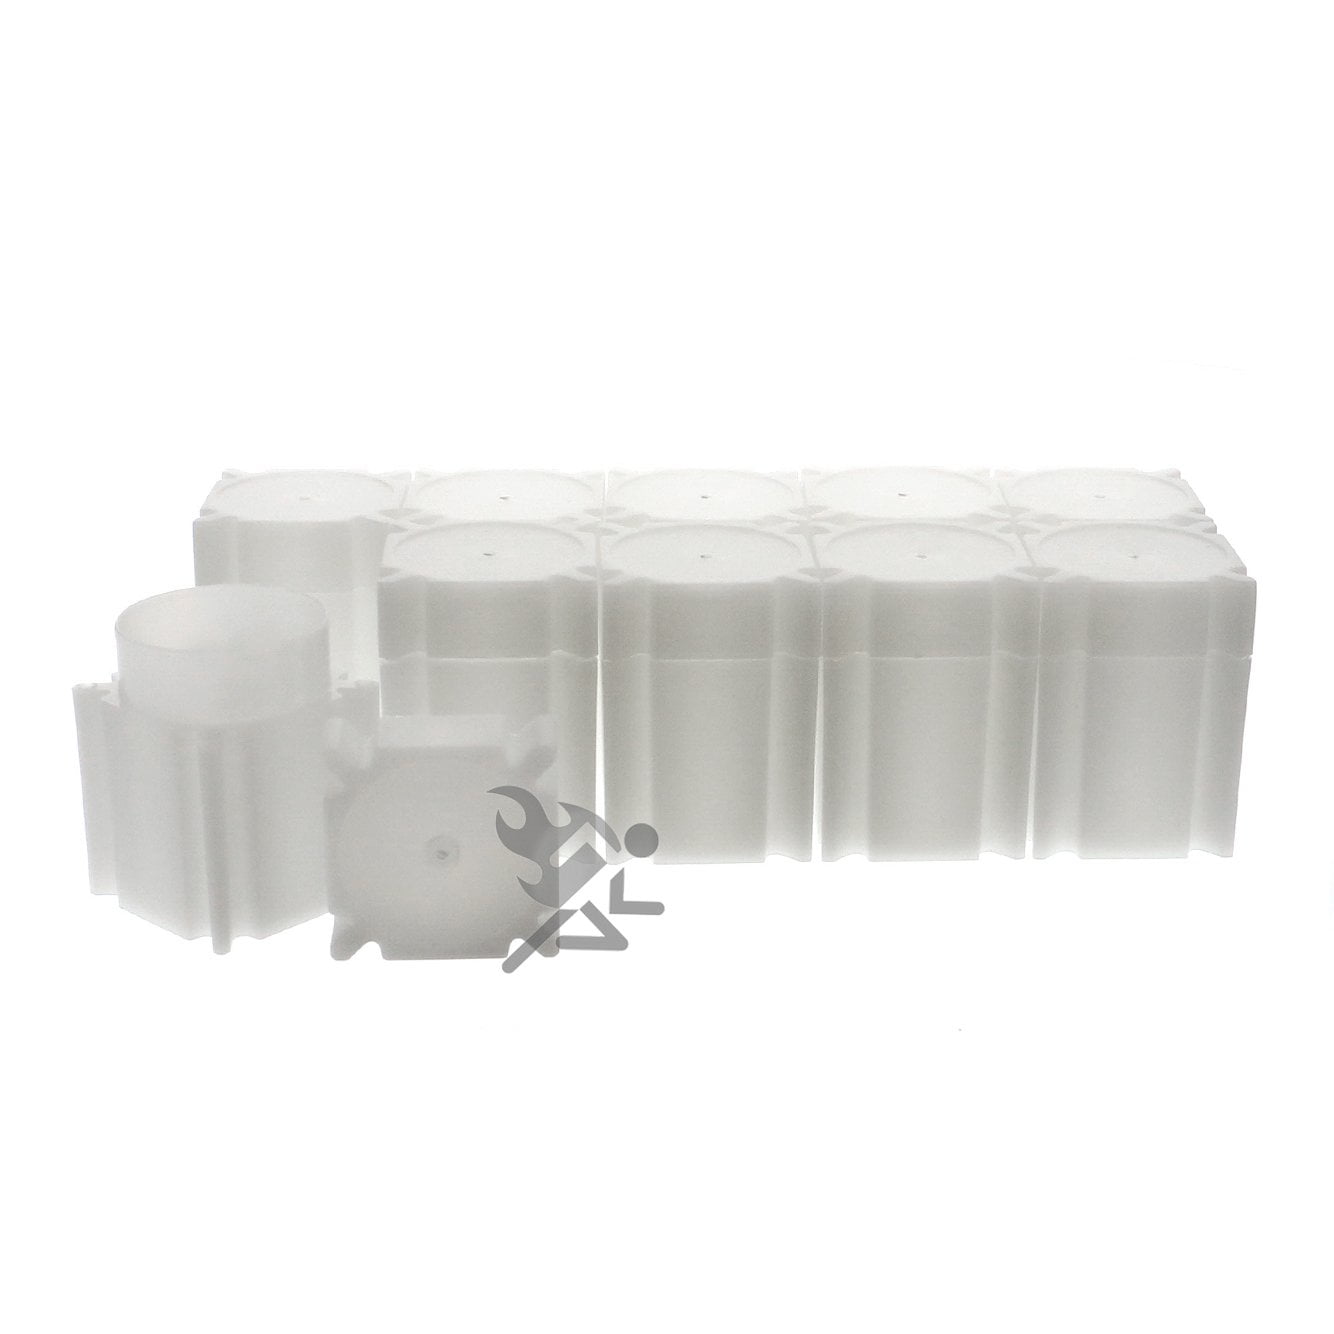 Lot of 10 Square Dime Coin Storage Tubes for Dimes by CoinSafe 